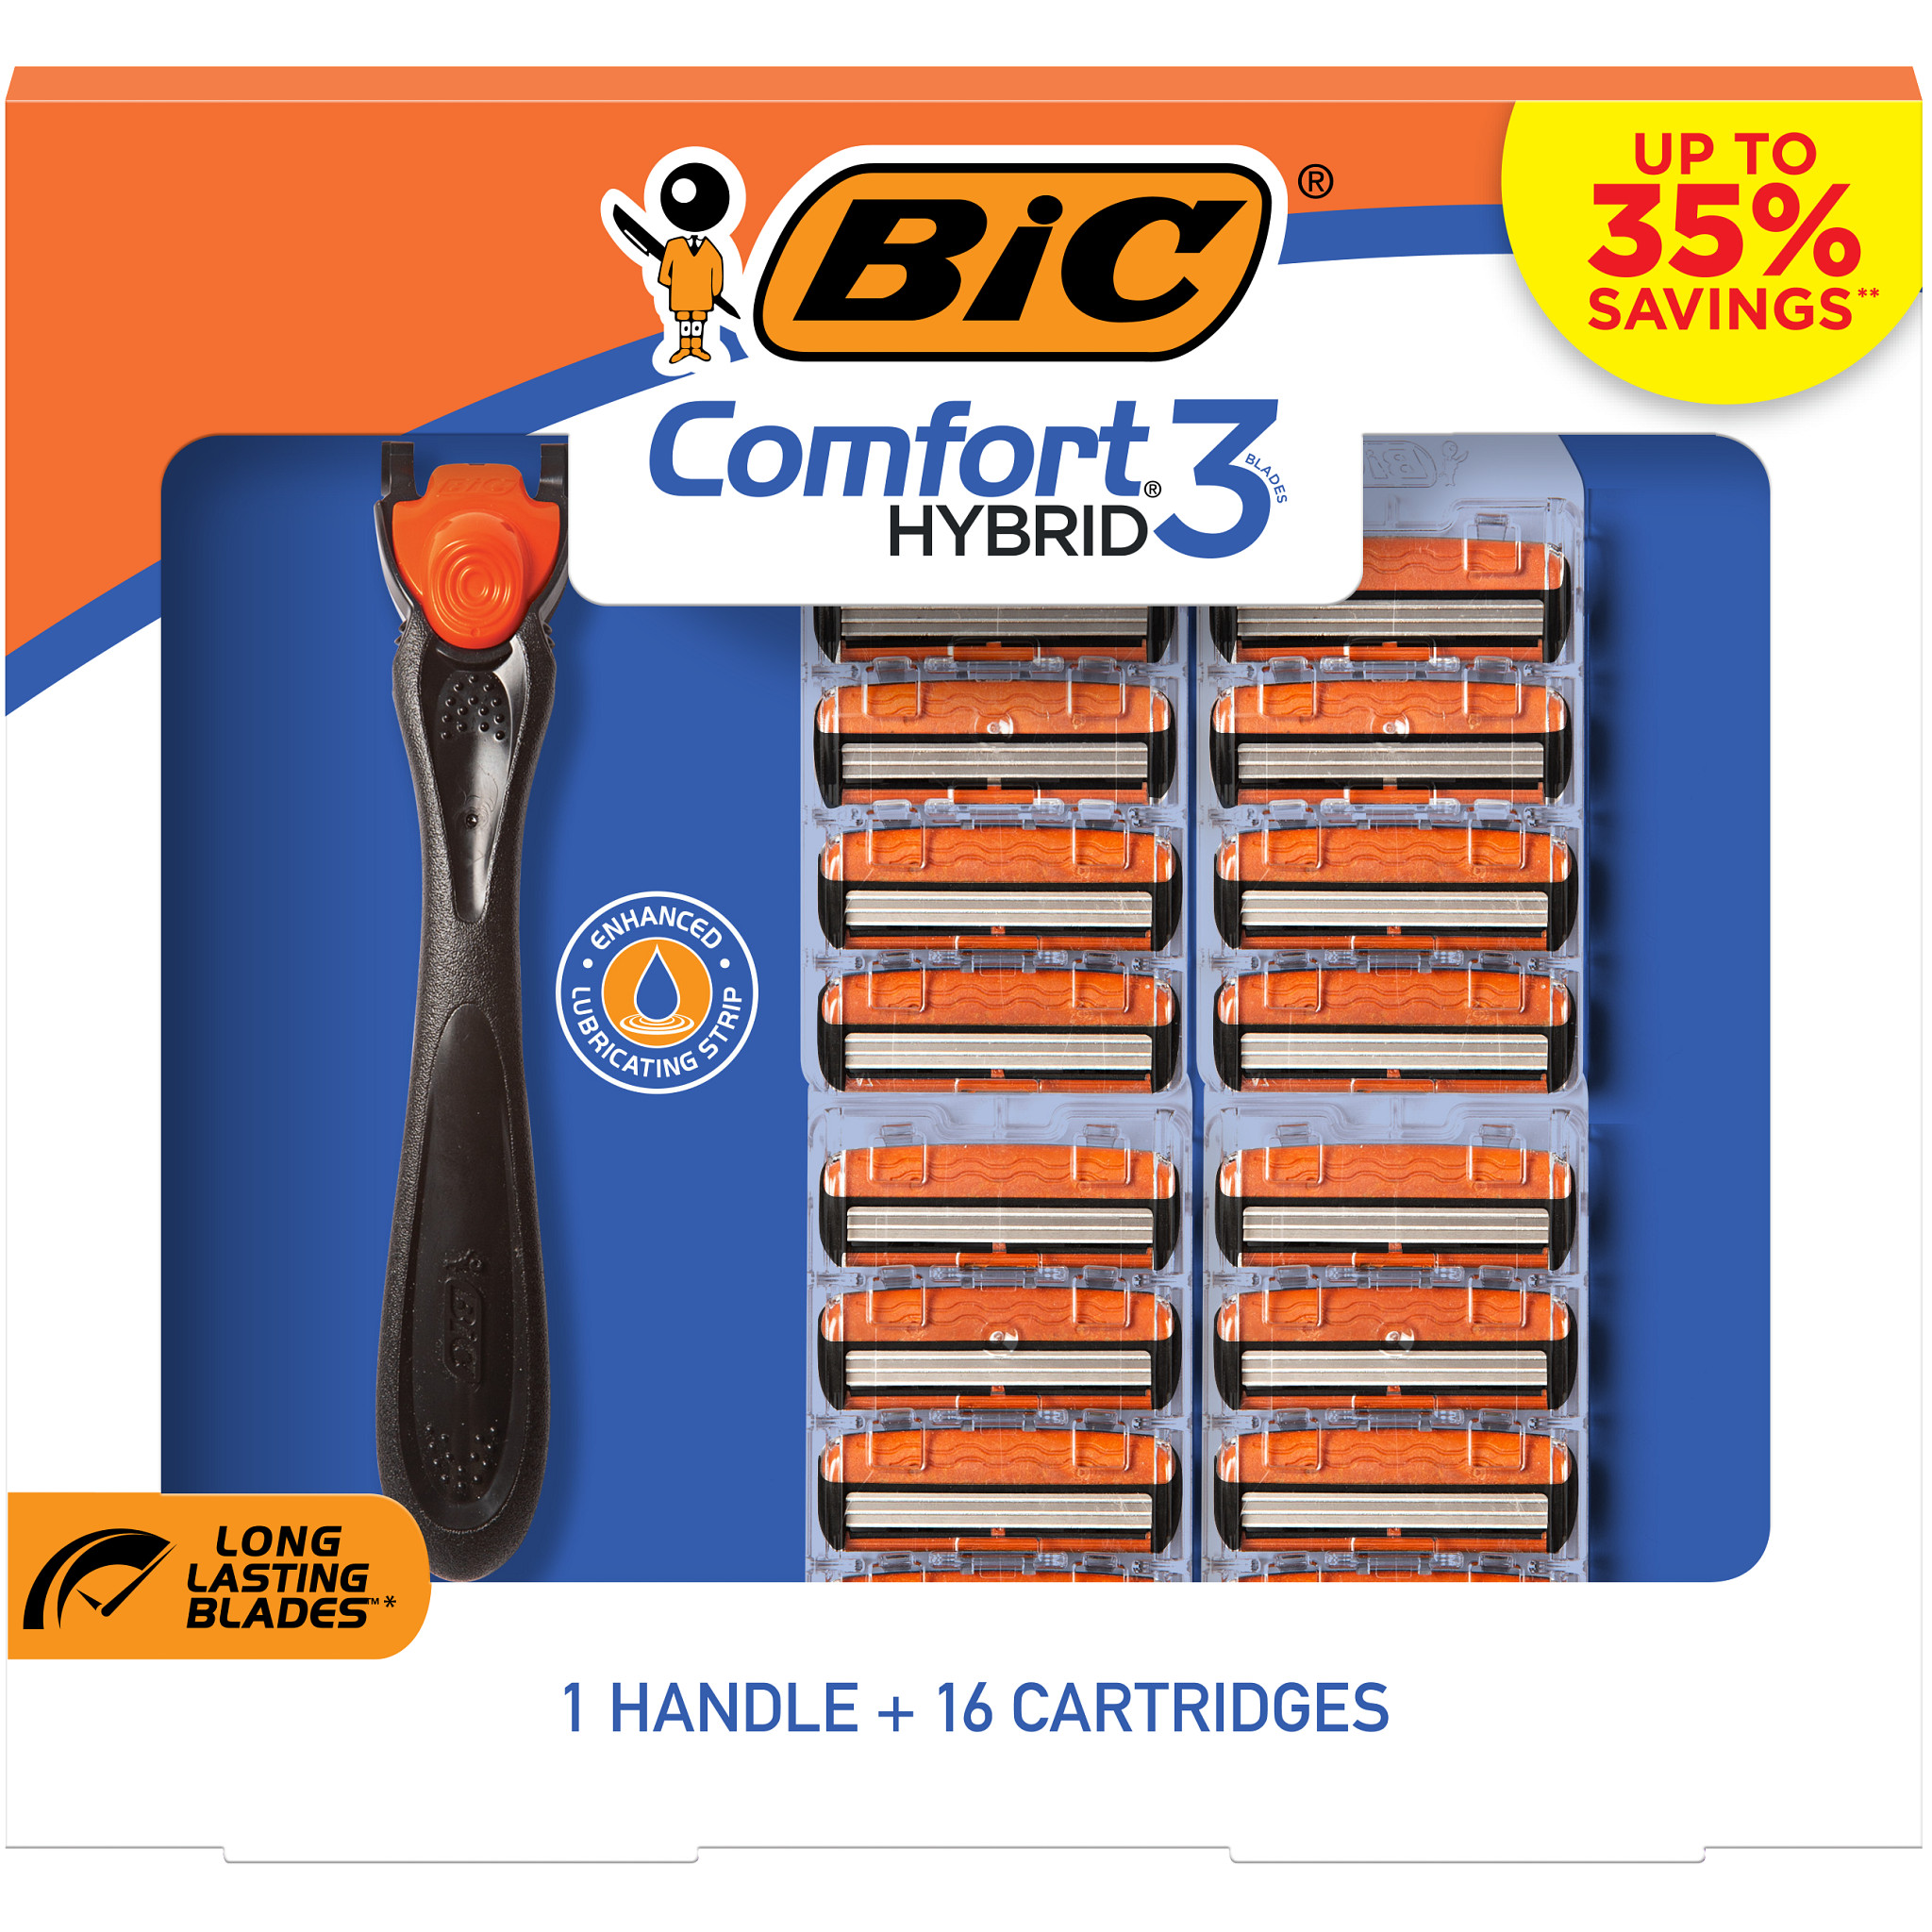 ($15 Value) BIC Holiday Gift Set, Comfort 3 Hybrid Disposable Razors for Men, 3 Blade, 1 Handle and 16 Cartridges - image 1 of 2